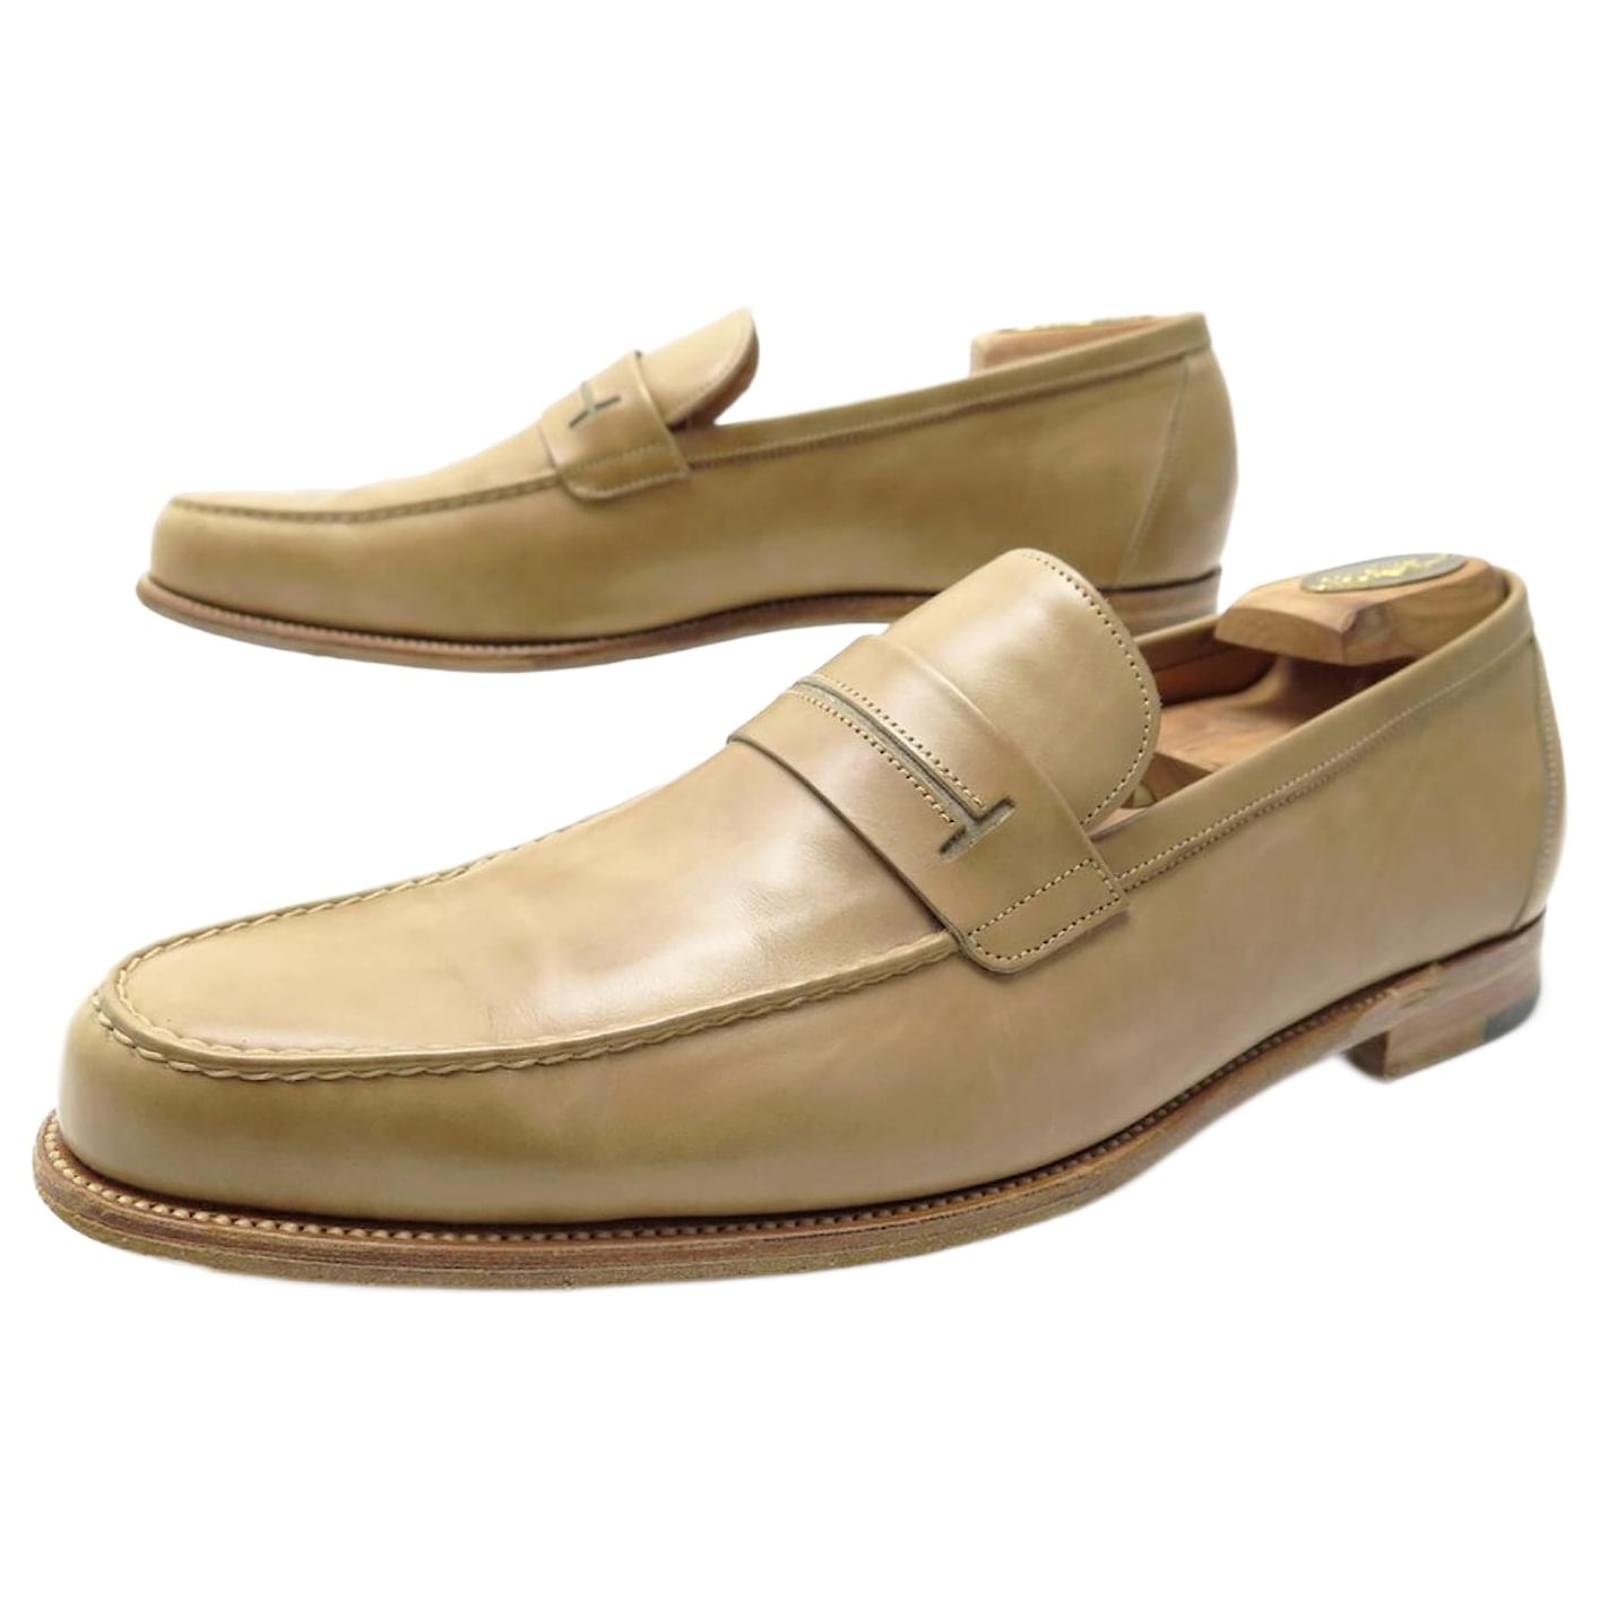 https://cdn1.jolicloset.com/imgr/full/2023/09/981420-1/hermes-shoes-keith-moccasins-445-in-camel-leather-loafers-shoes.jpg